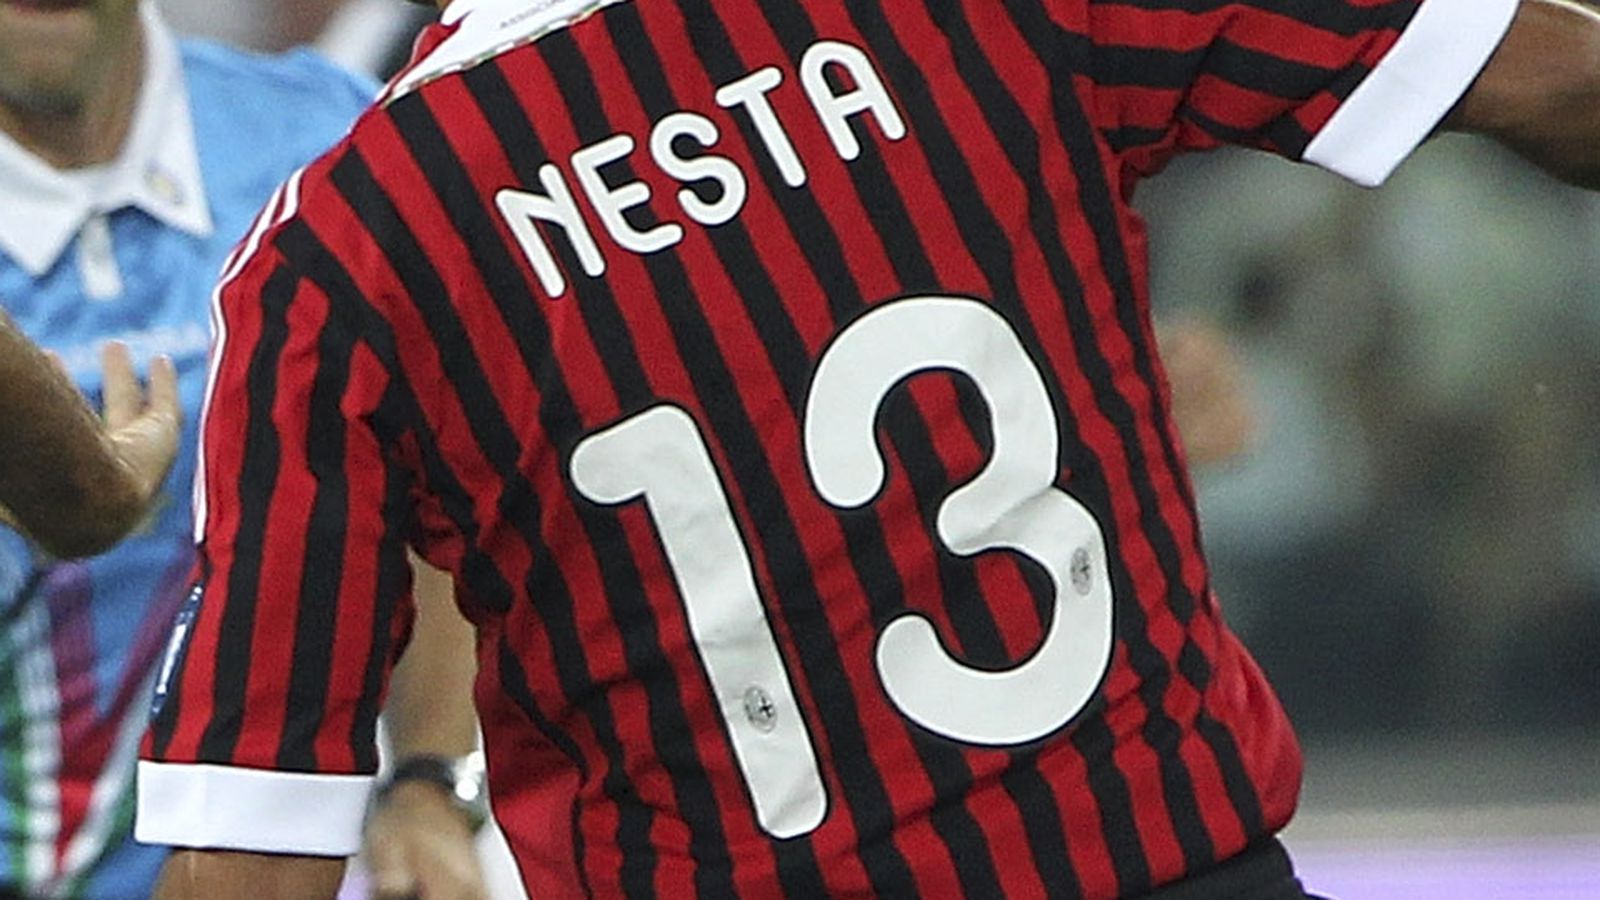 Reigning Scudetto winner Alessio Romagnoli has exalted Italy great Alessandro Nesta as the greatest defender the country has produced in history.